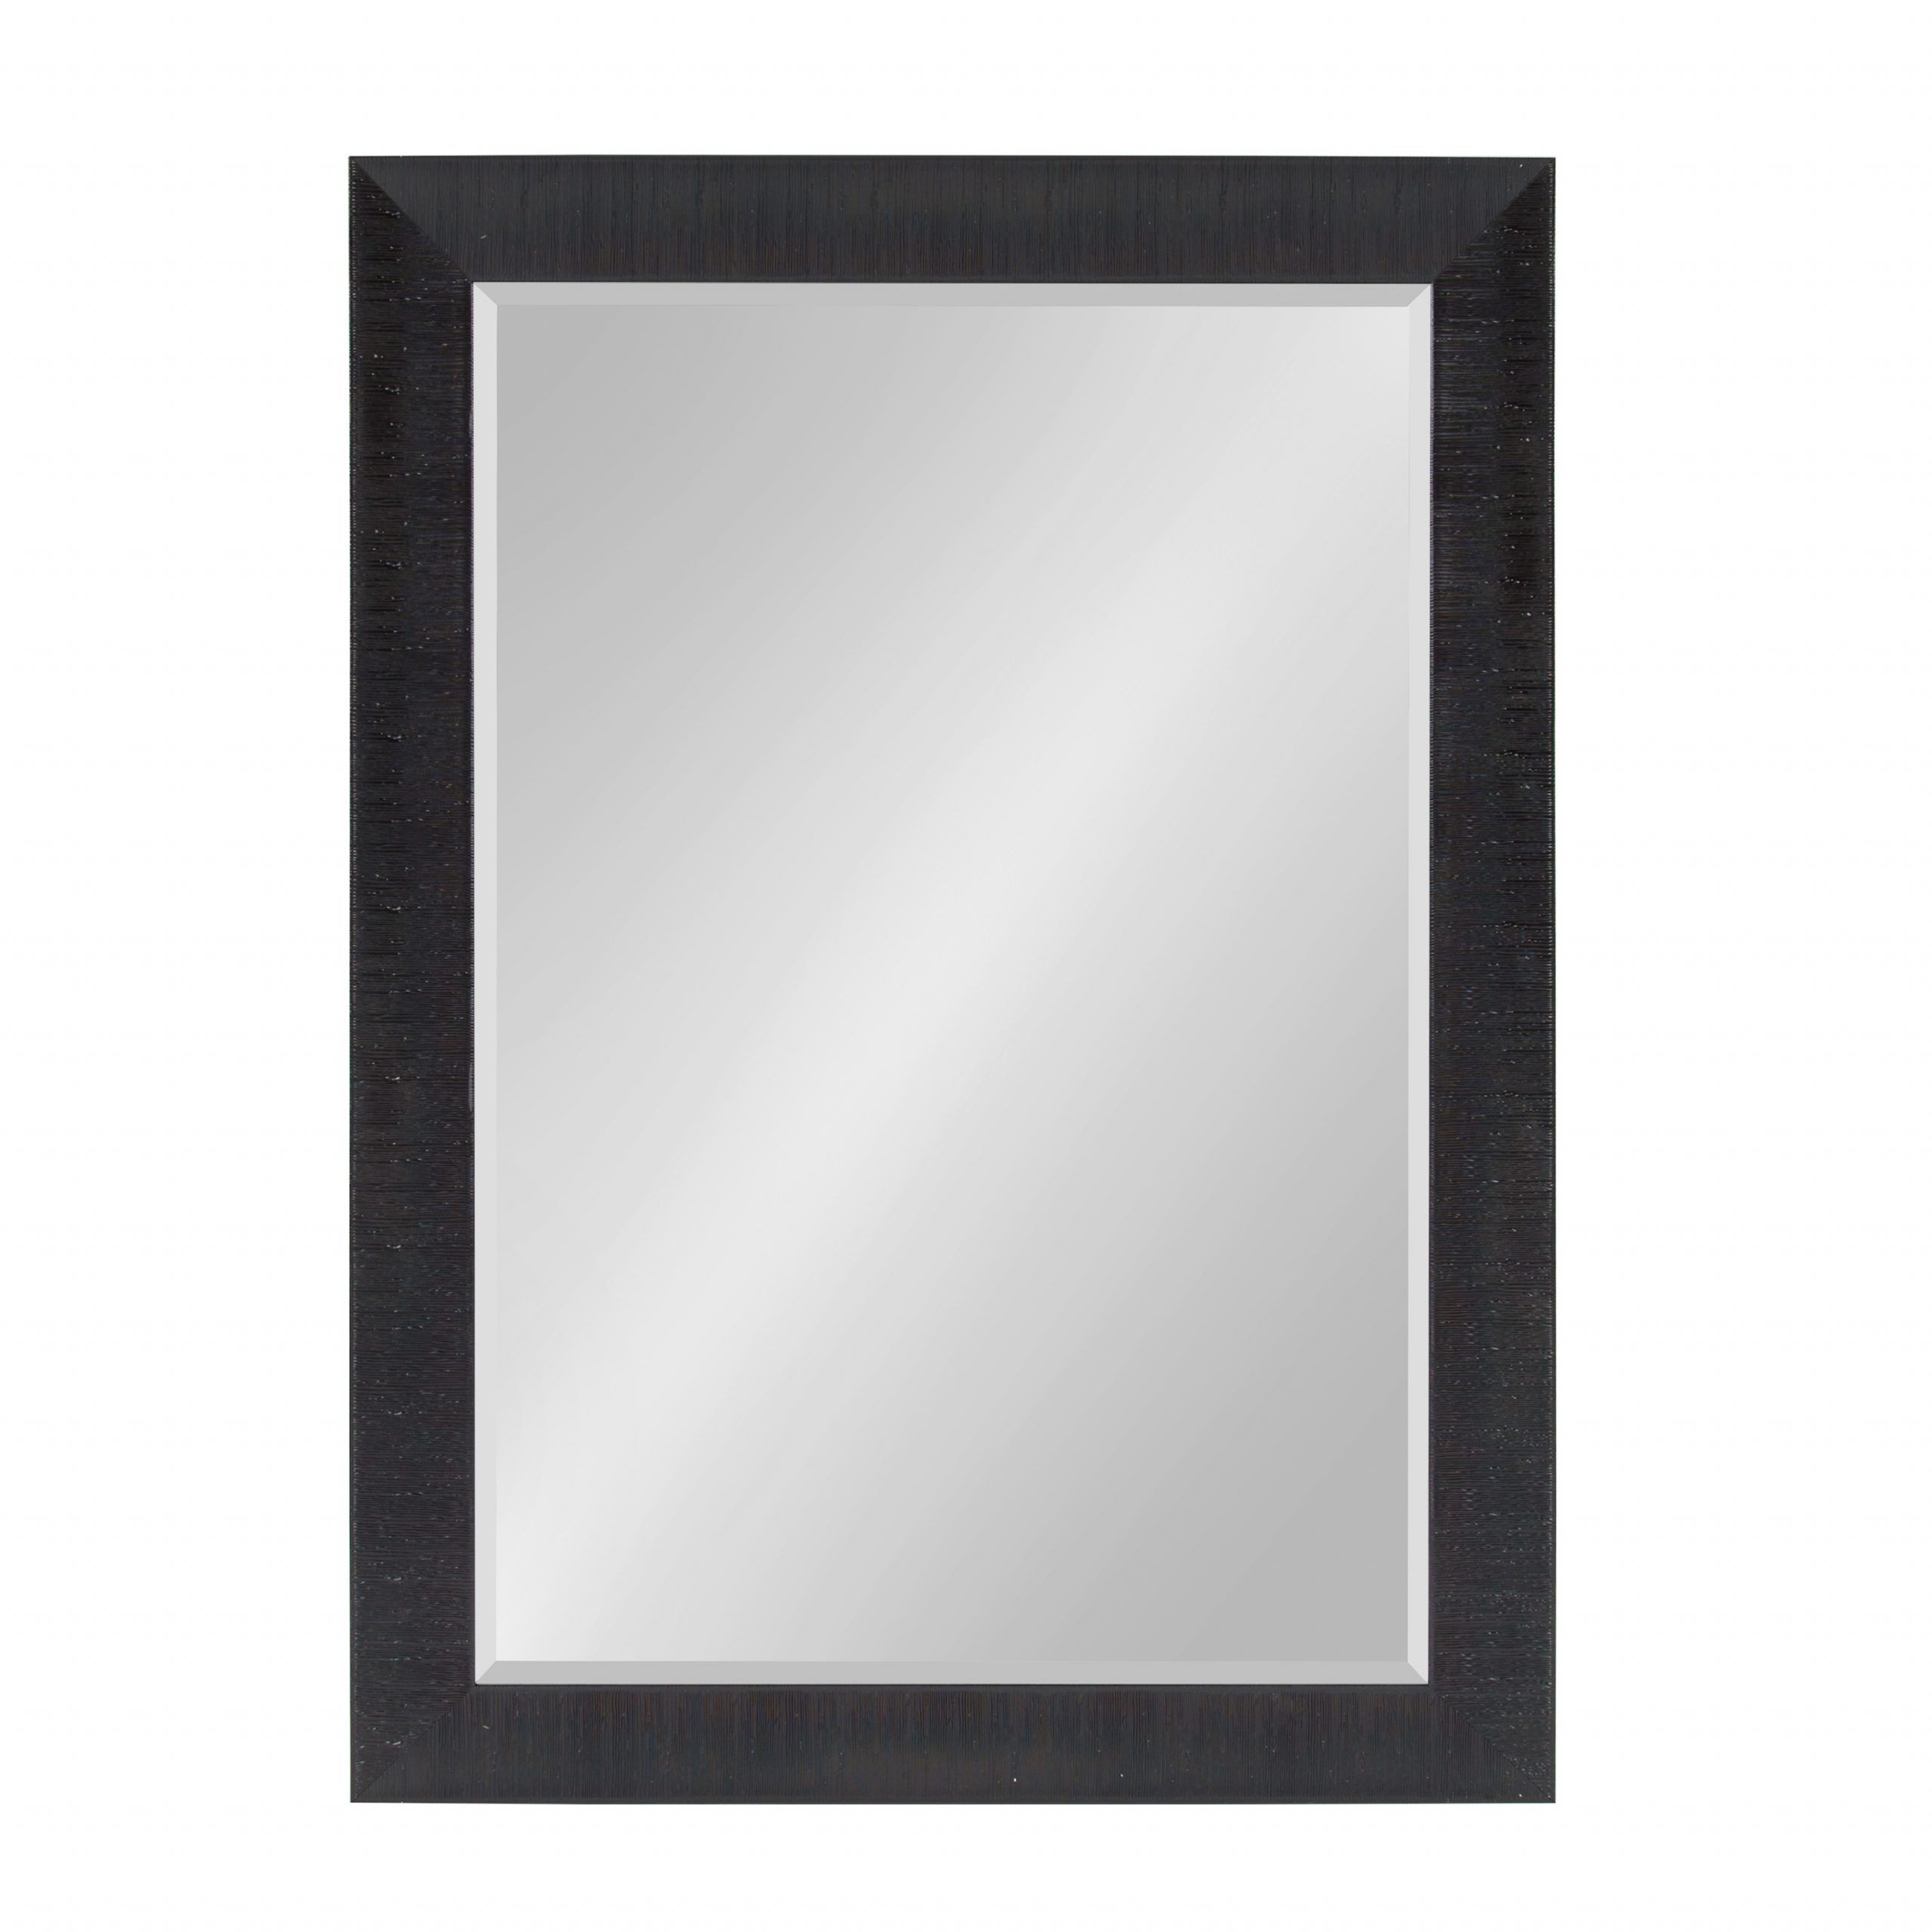 Kate And Laurel – Reyna Large Framed Rectangle Wall Mirror, 30 X 42 With Regard To Square Oversized Wall Mirrors (View 12 of 15)